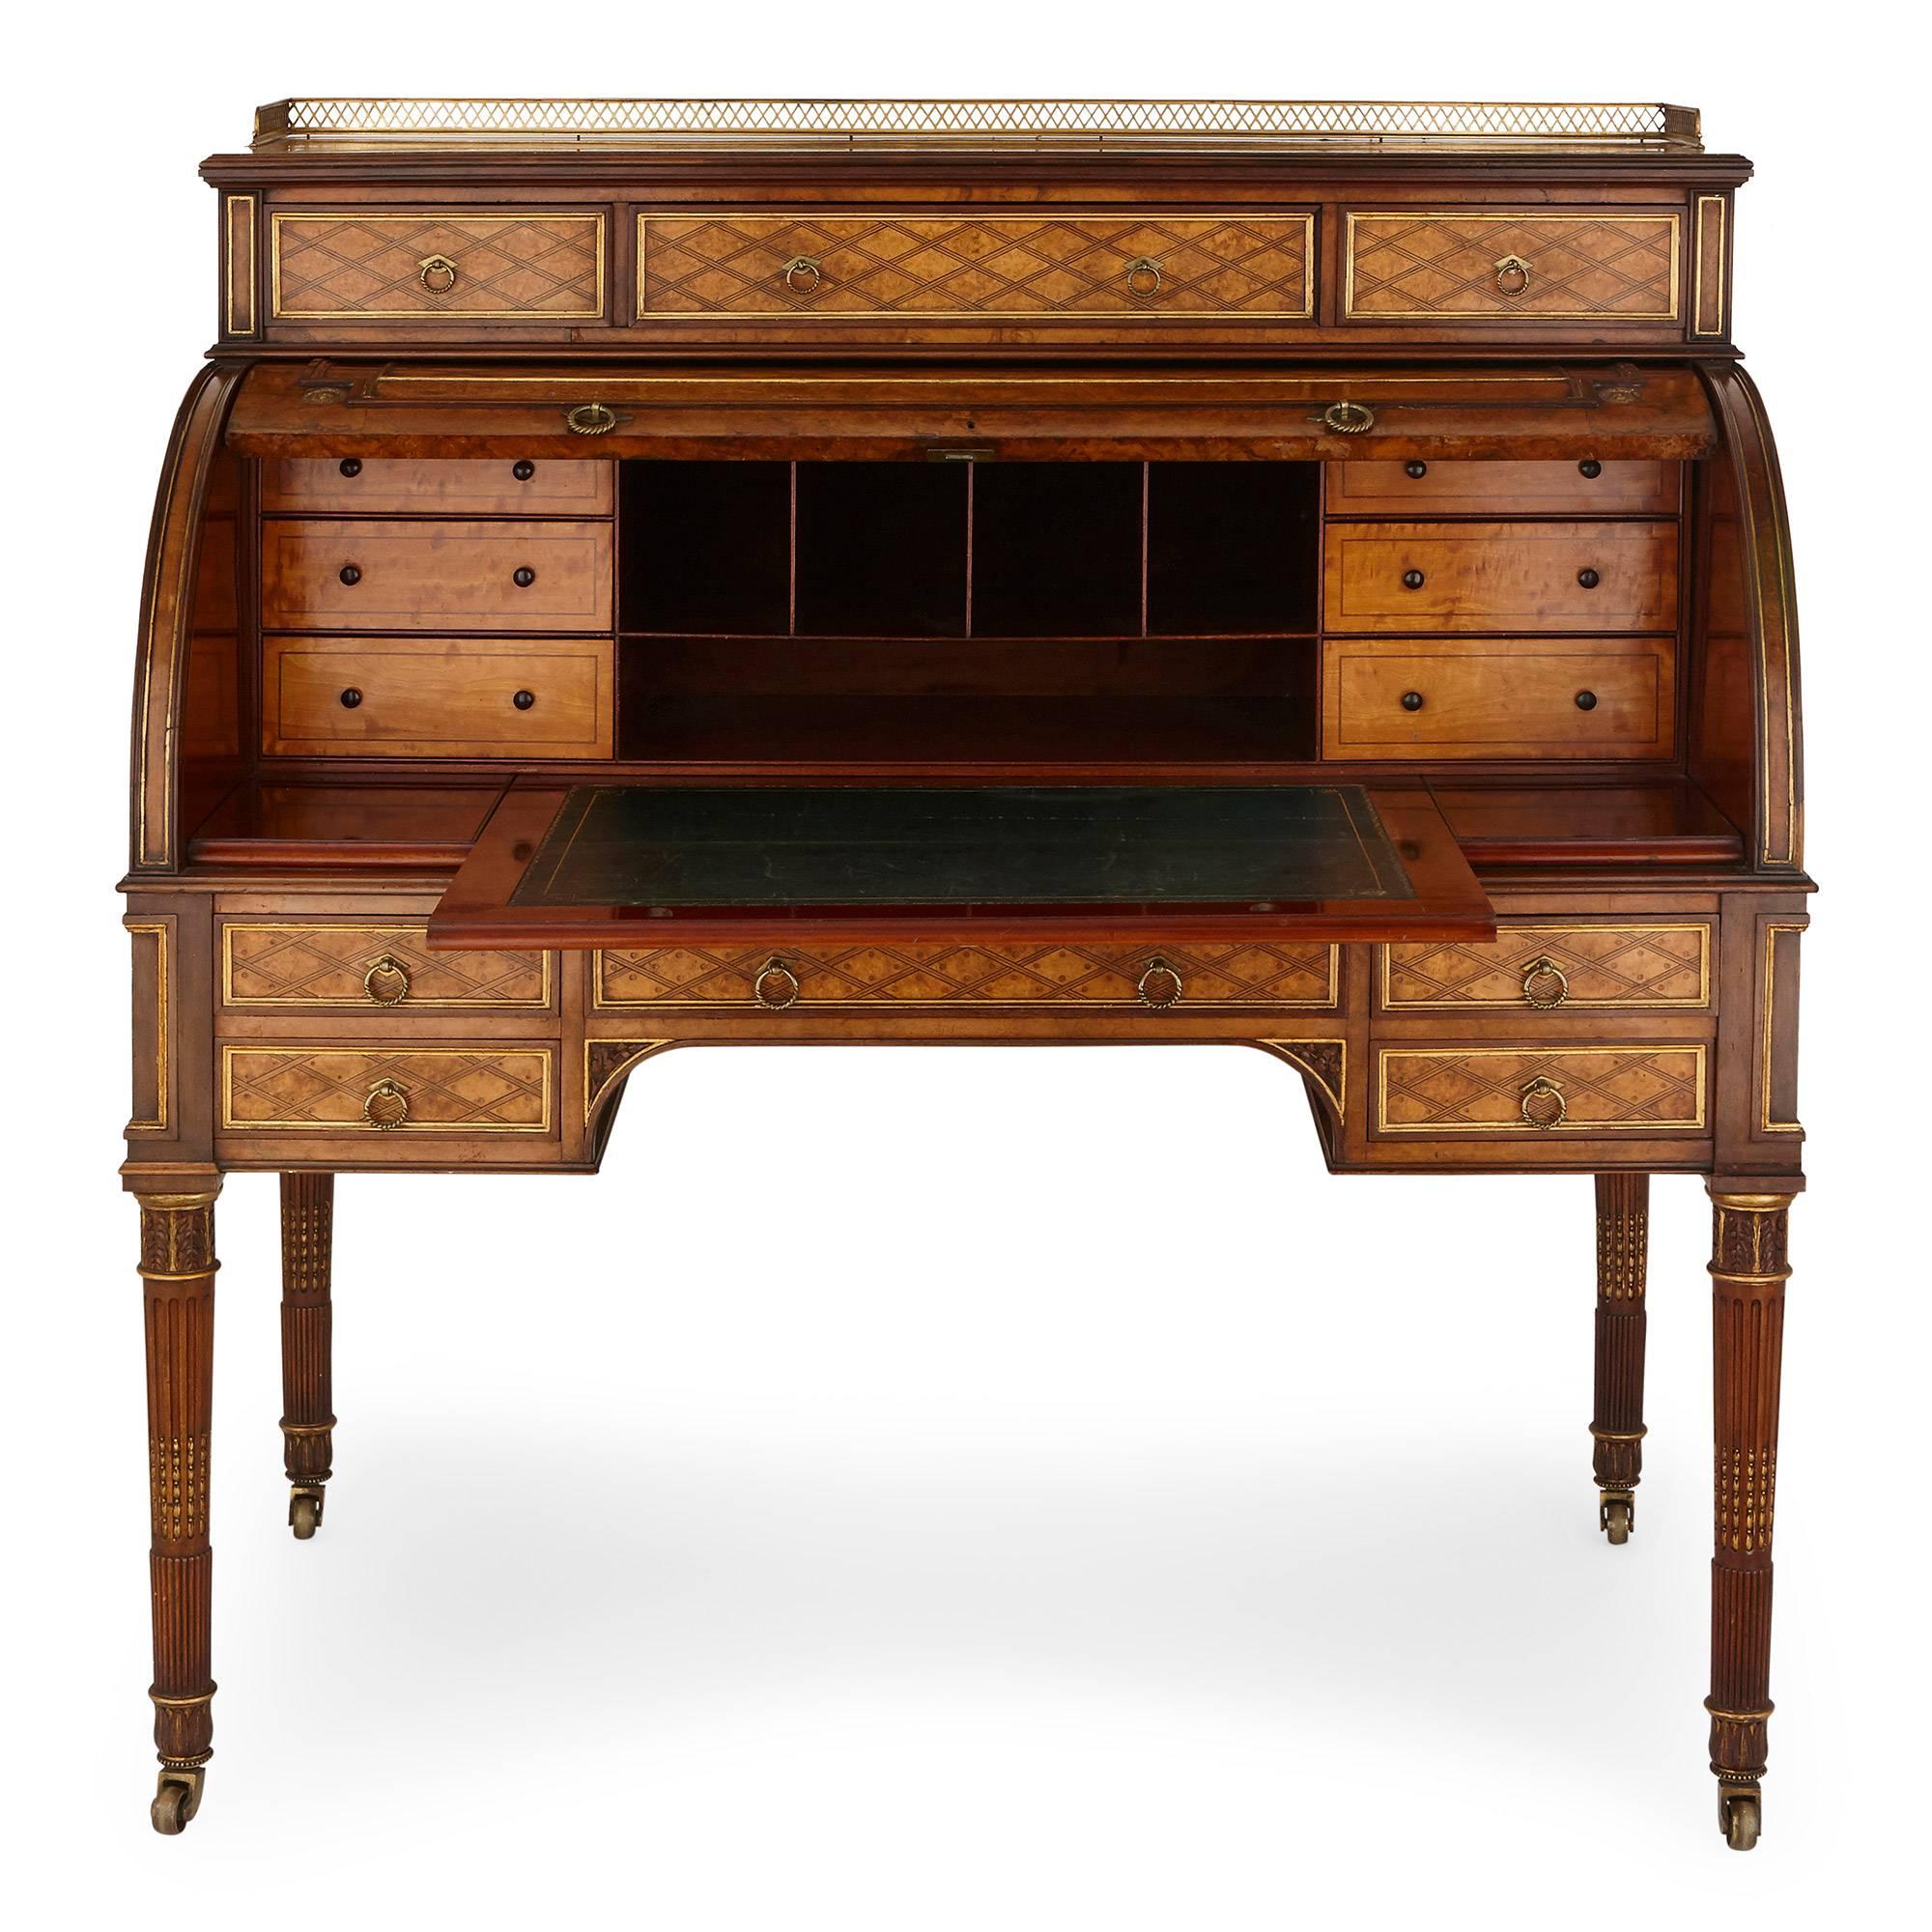 The classic, distinctive diamond shaped parquetry design of perhaps the most acclaimed British furniture maker of the 19th century, Donald Ross, adorns this fine bureau. Below its four tapering, fluted legs, the table has wheels on, which it allow